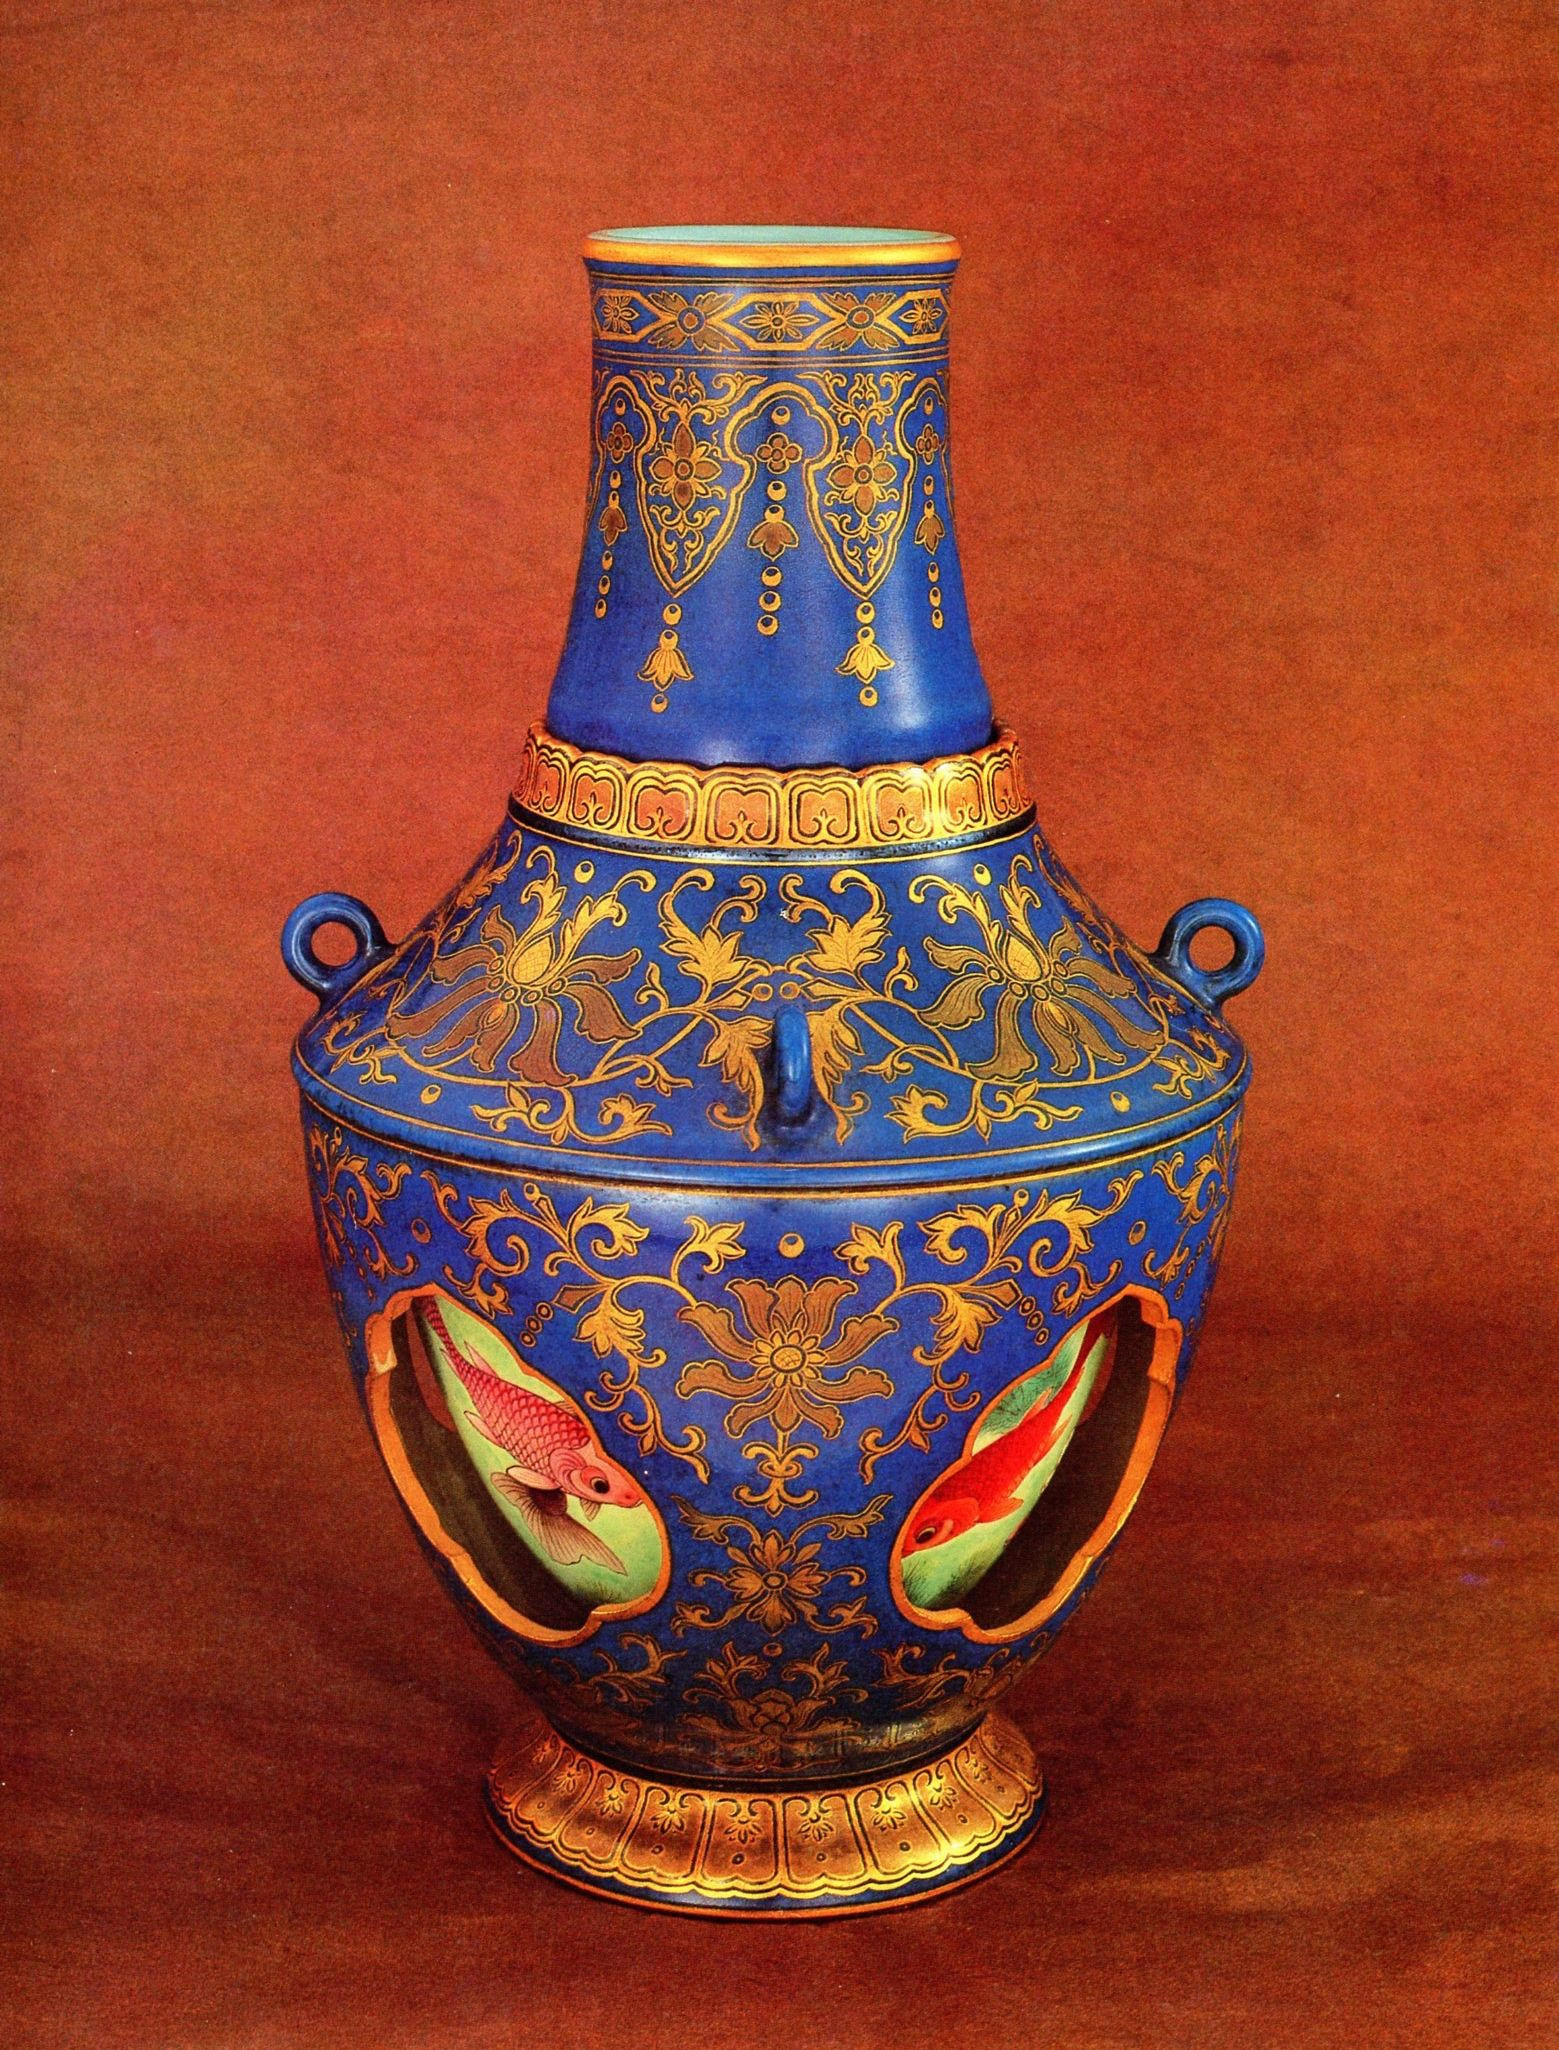 15 Recommended oriental Accent Vase 2024 free download oriental accent vase of a blue glaze vase with gold tracery comprised of an outer vessel with regard to a blue glaze vase with gold tracery comprised of an outer vessel made in openwork